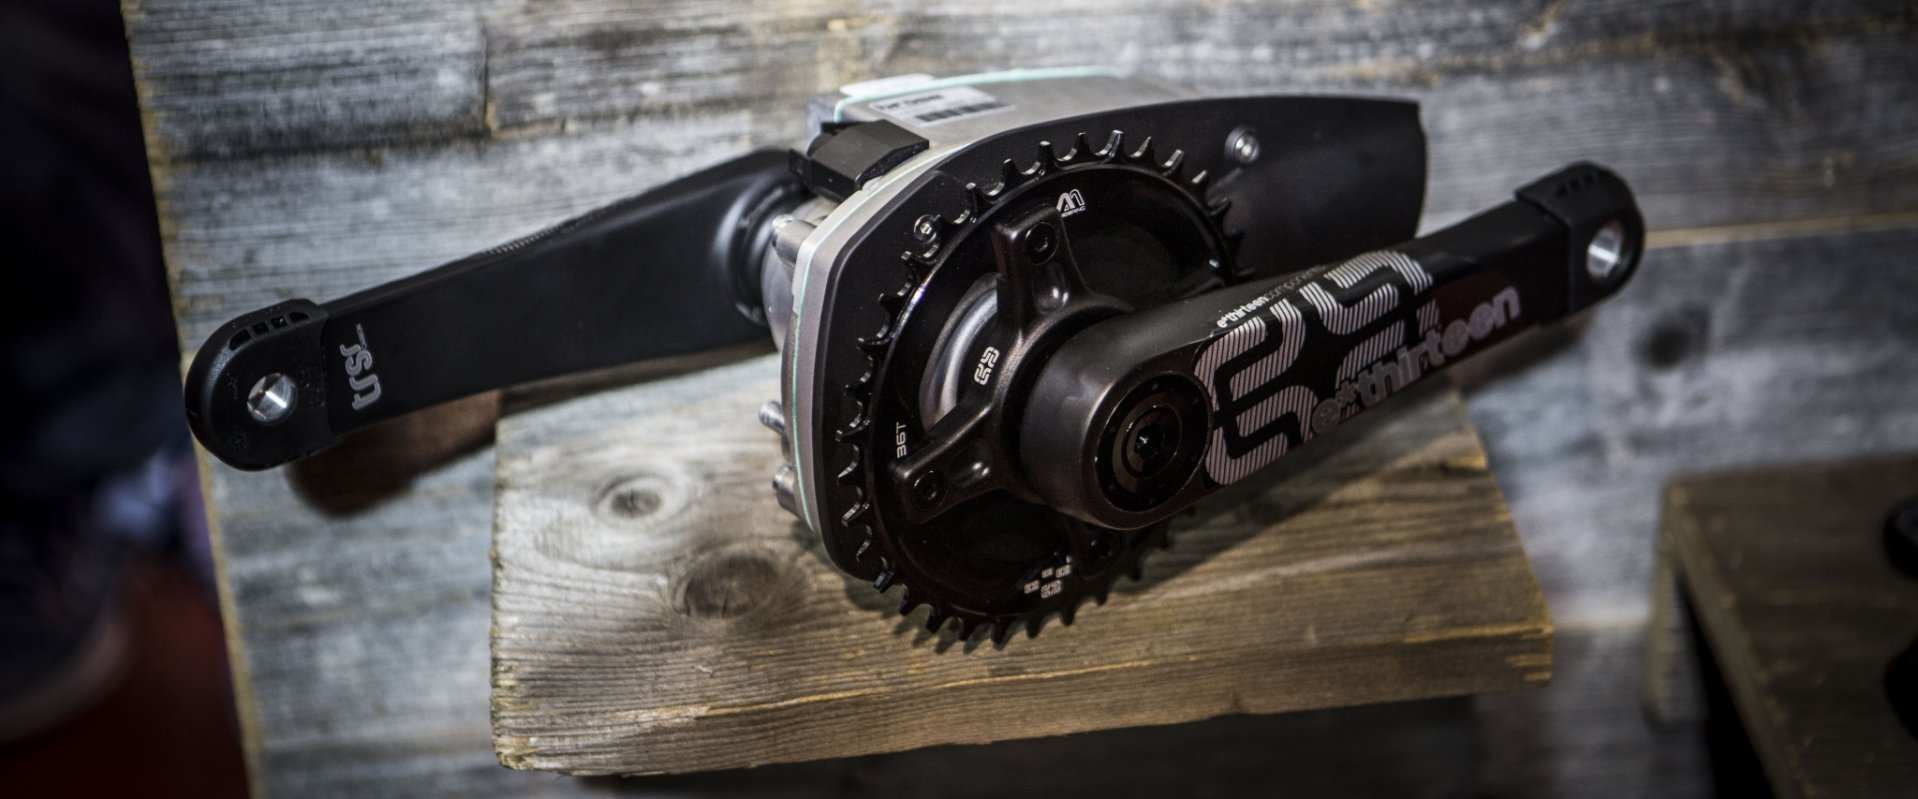 e*thirteen knows that e-bikes are here to stay, so why not offer some serious TRS cranks specifically made for the assisted pedalers.